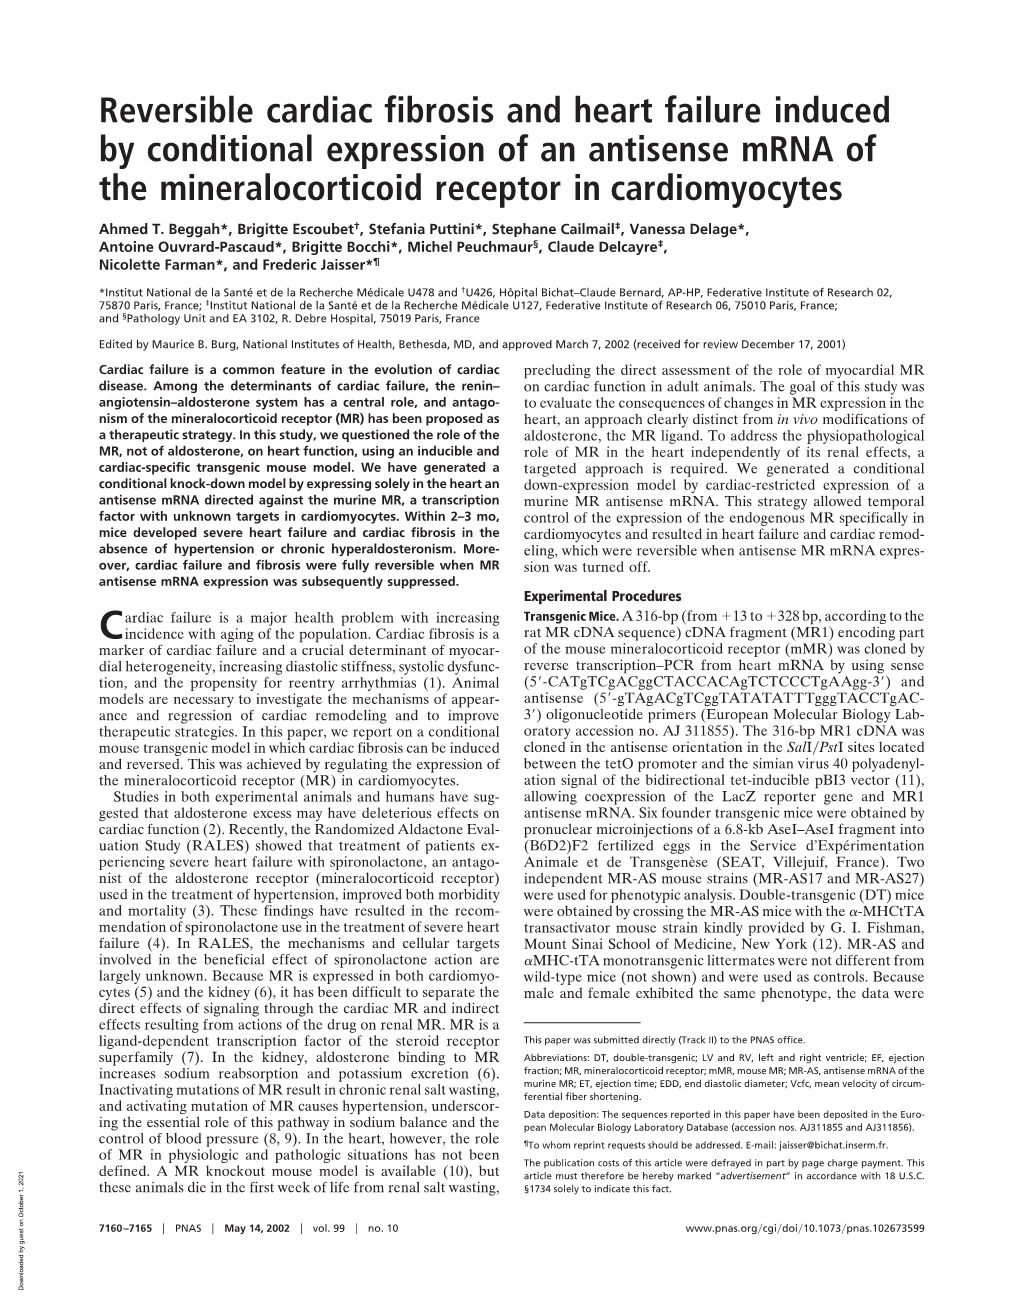 Reversible Cardiac Fibrosis and Heart Failure Induced by Conditional Expression of an Antisense Mrna of the Mineralocorticoid Receptor in Cardiomyocytes